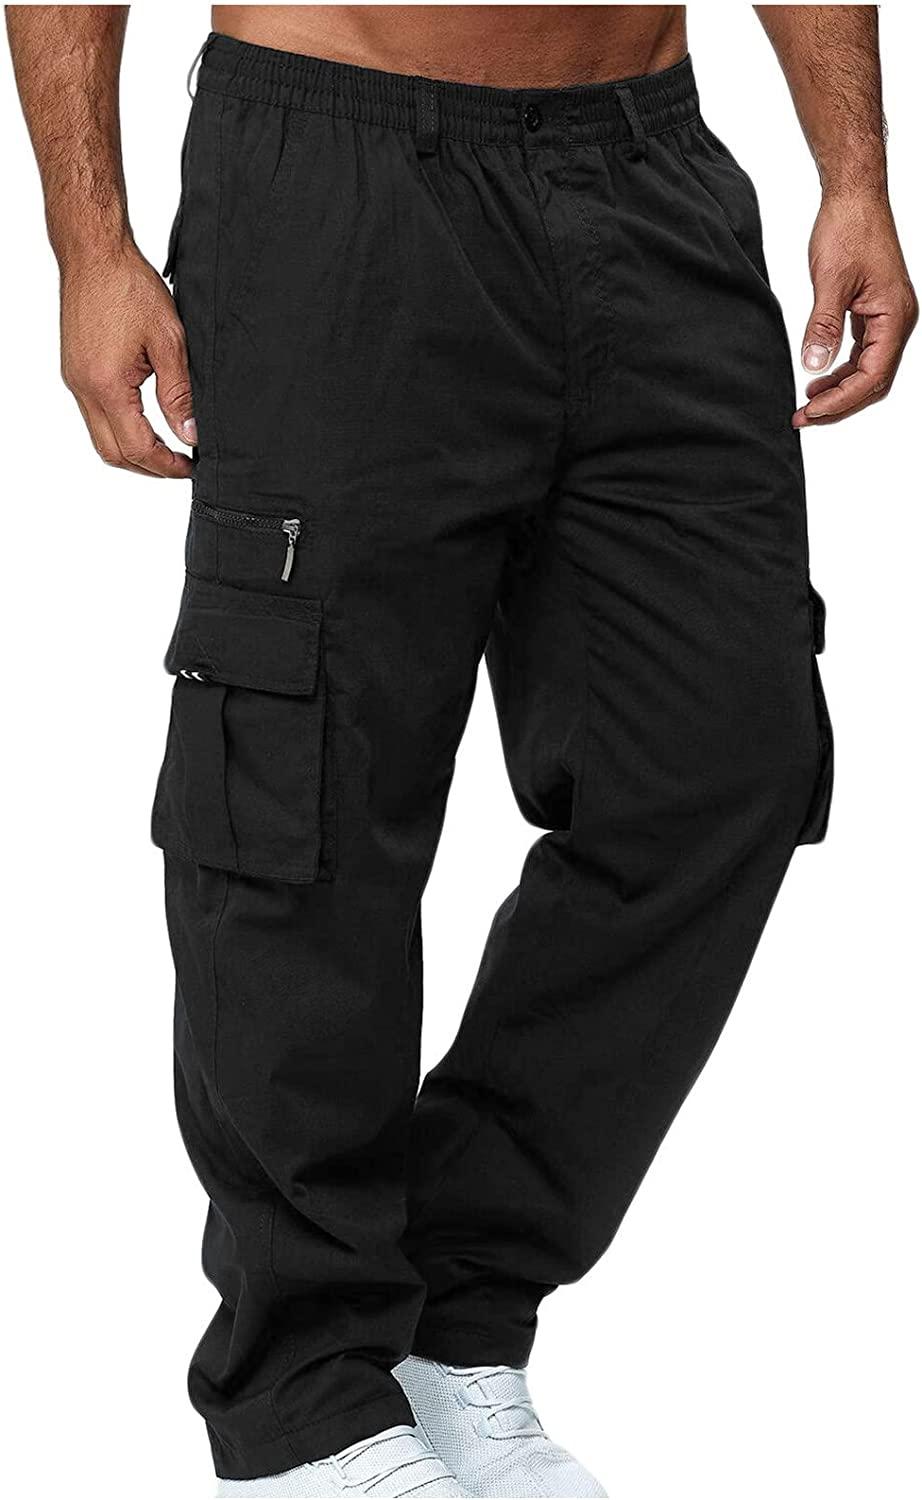 jsaierl Cargo Pants for Men, Men's Relaxed Straight-Fit Cargo